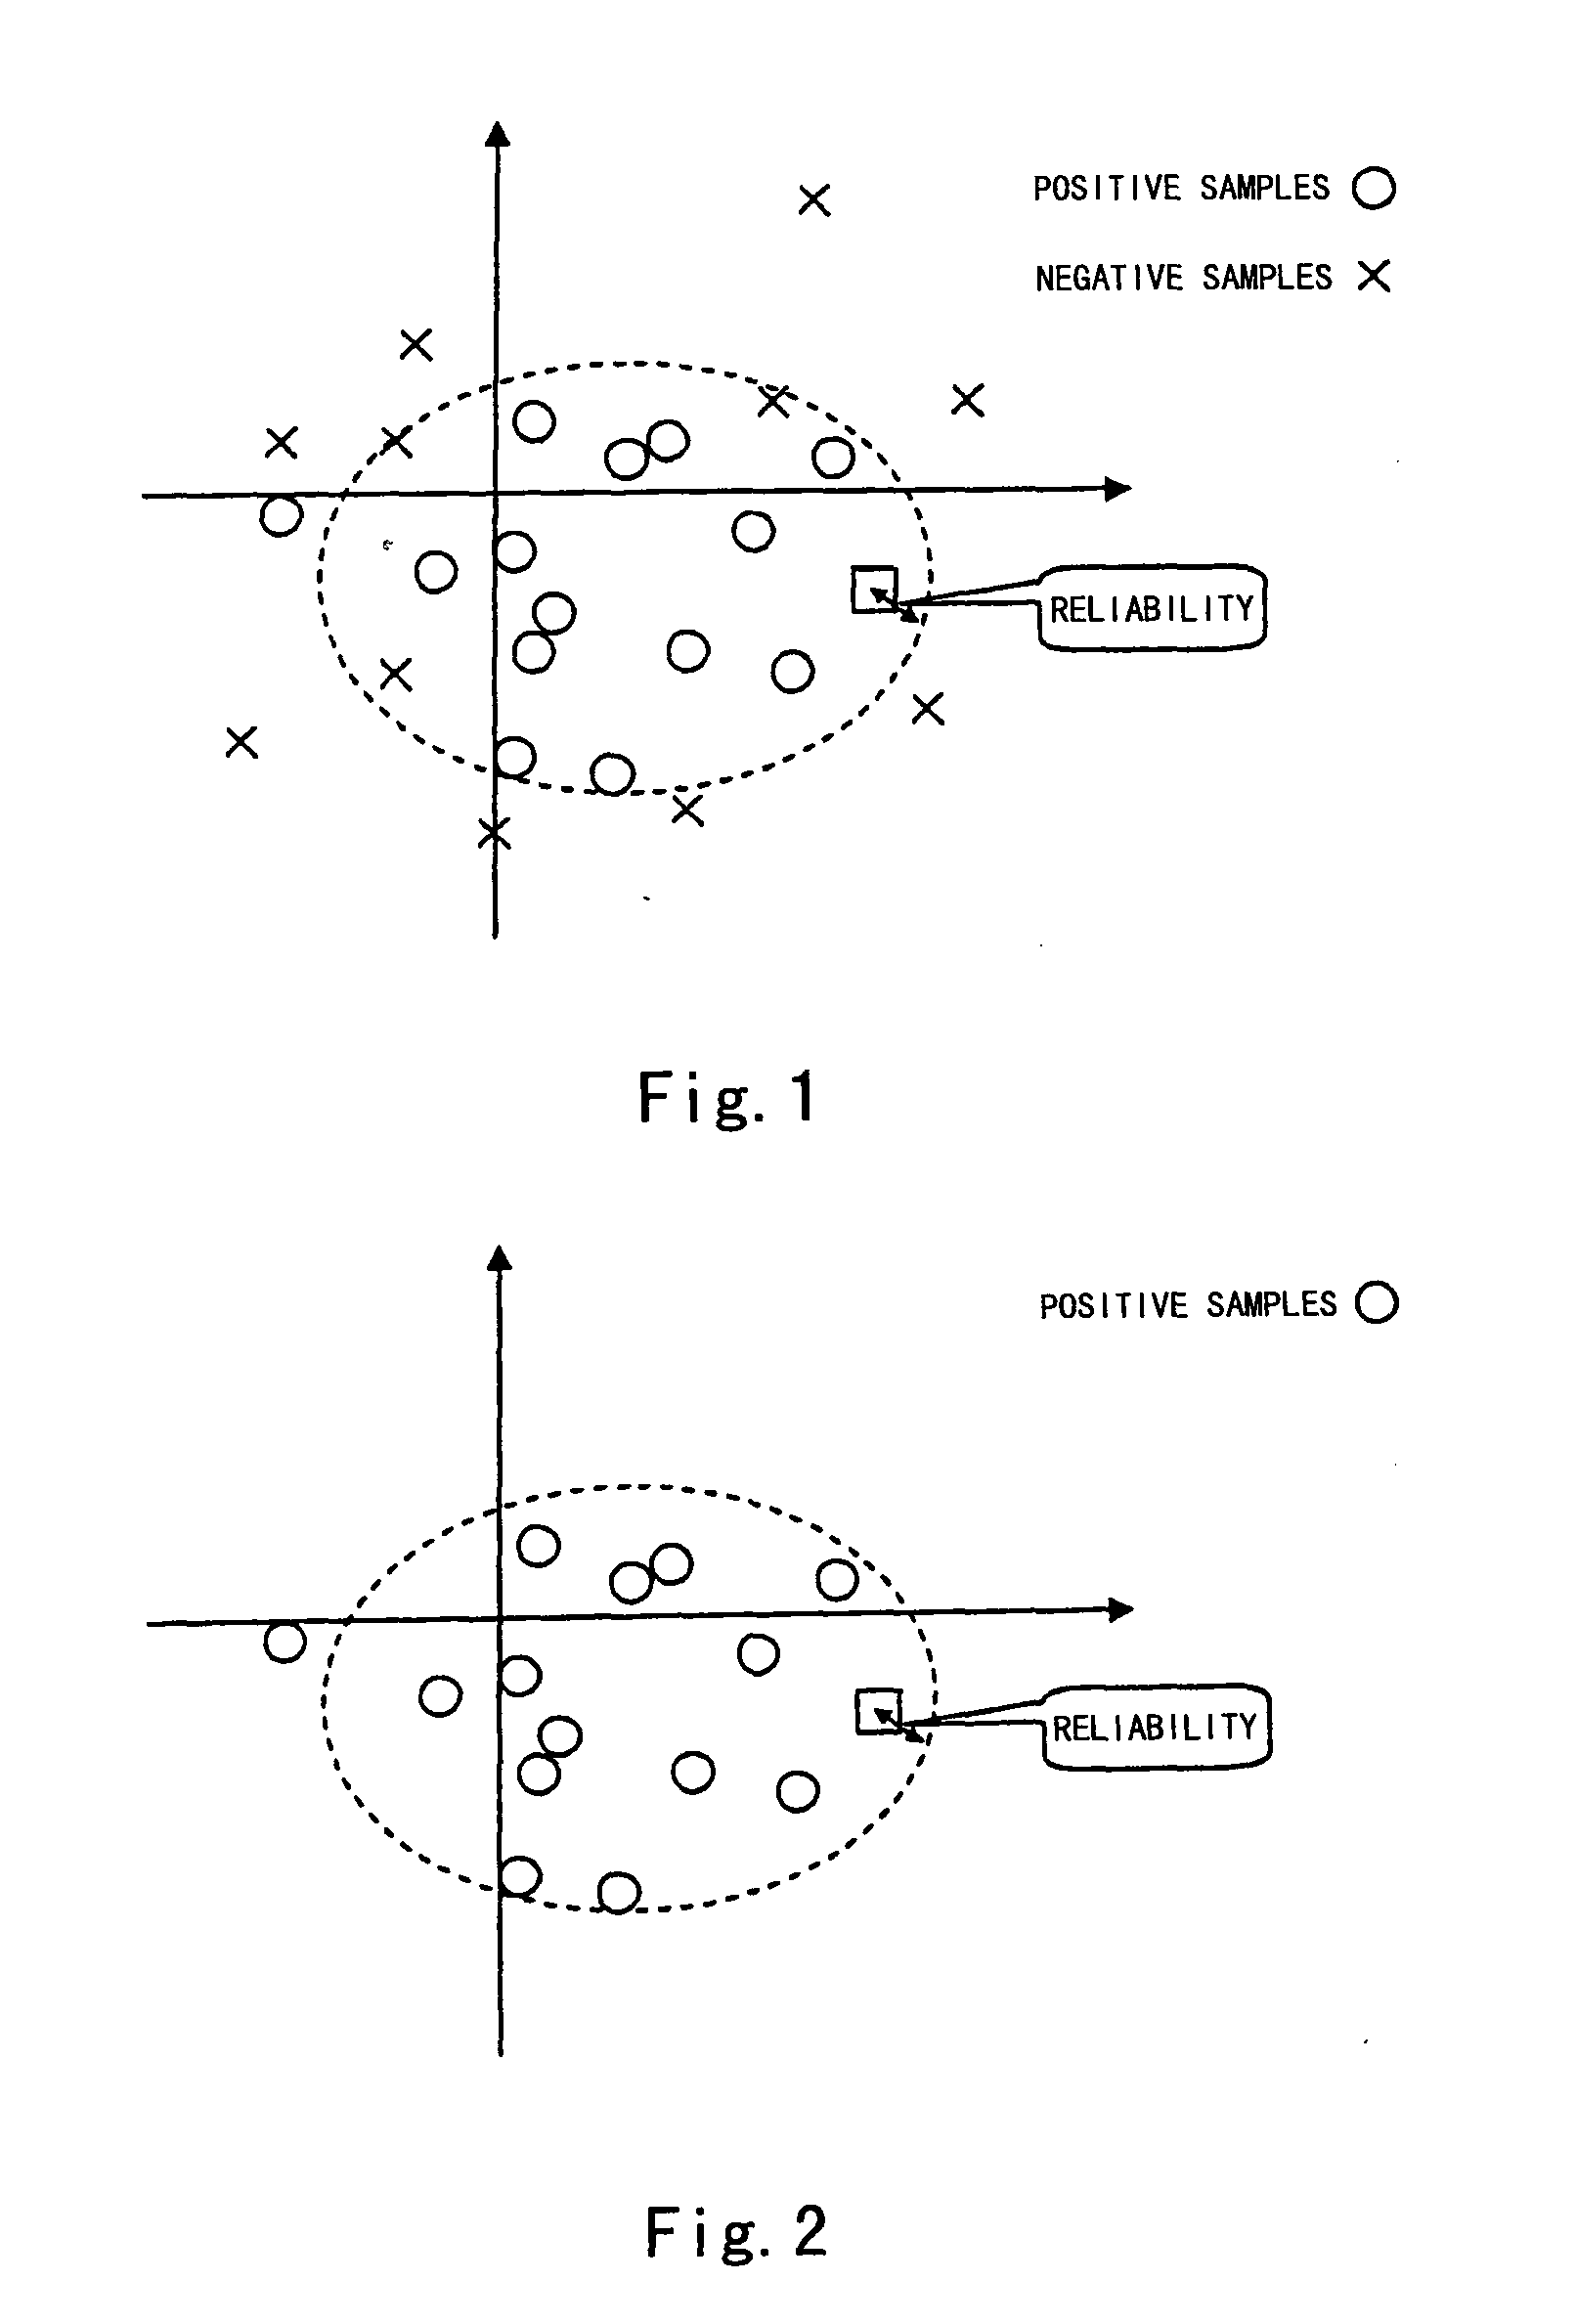 Method and apparatus for named entity recognition in natural language